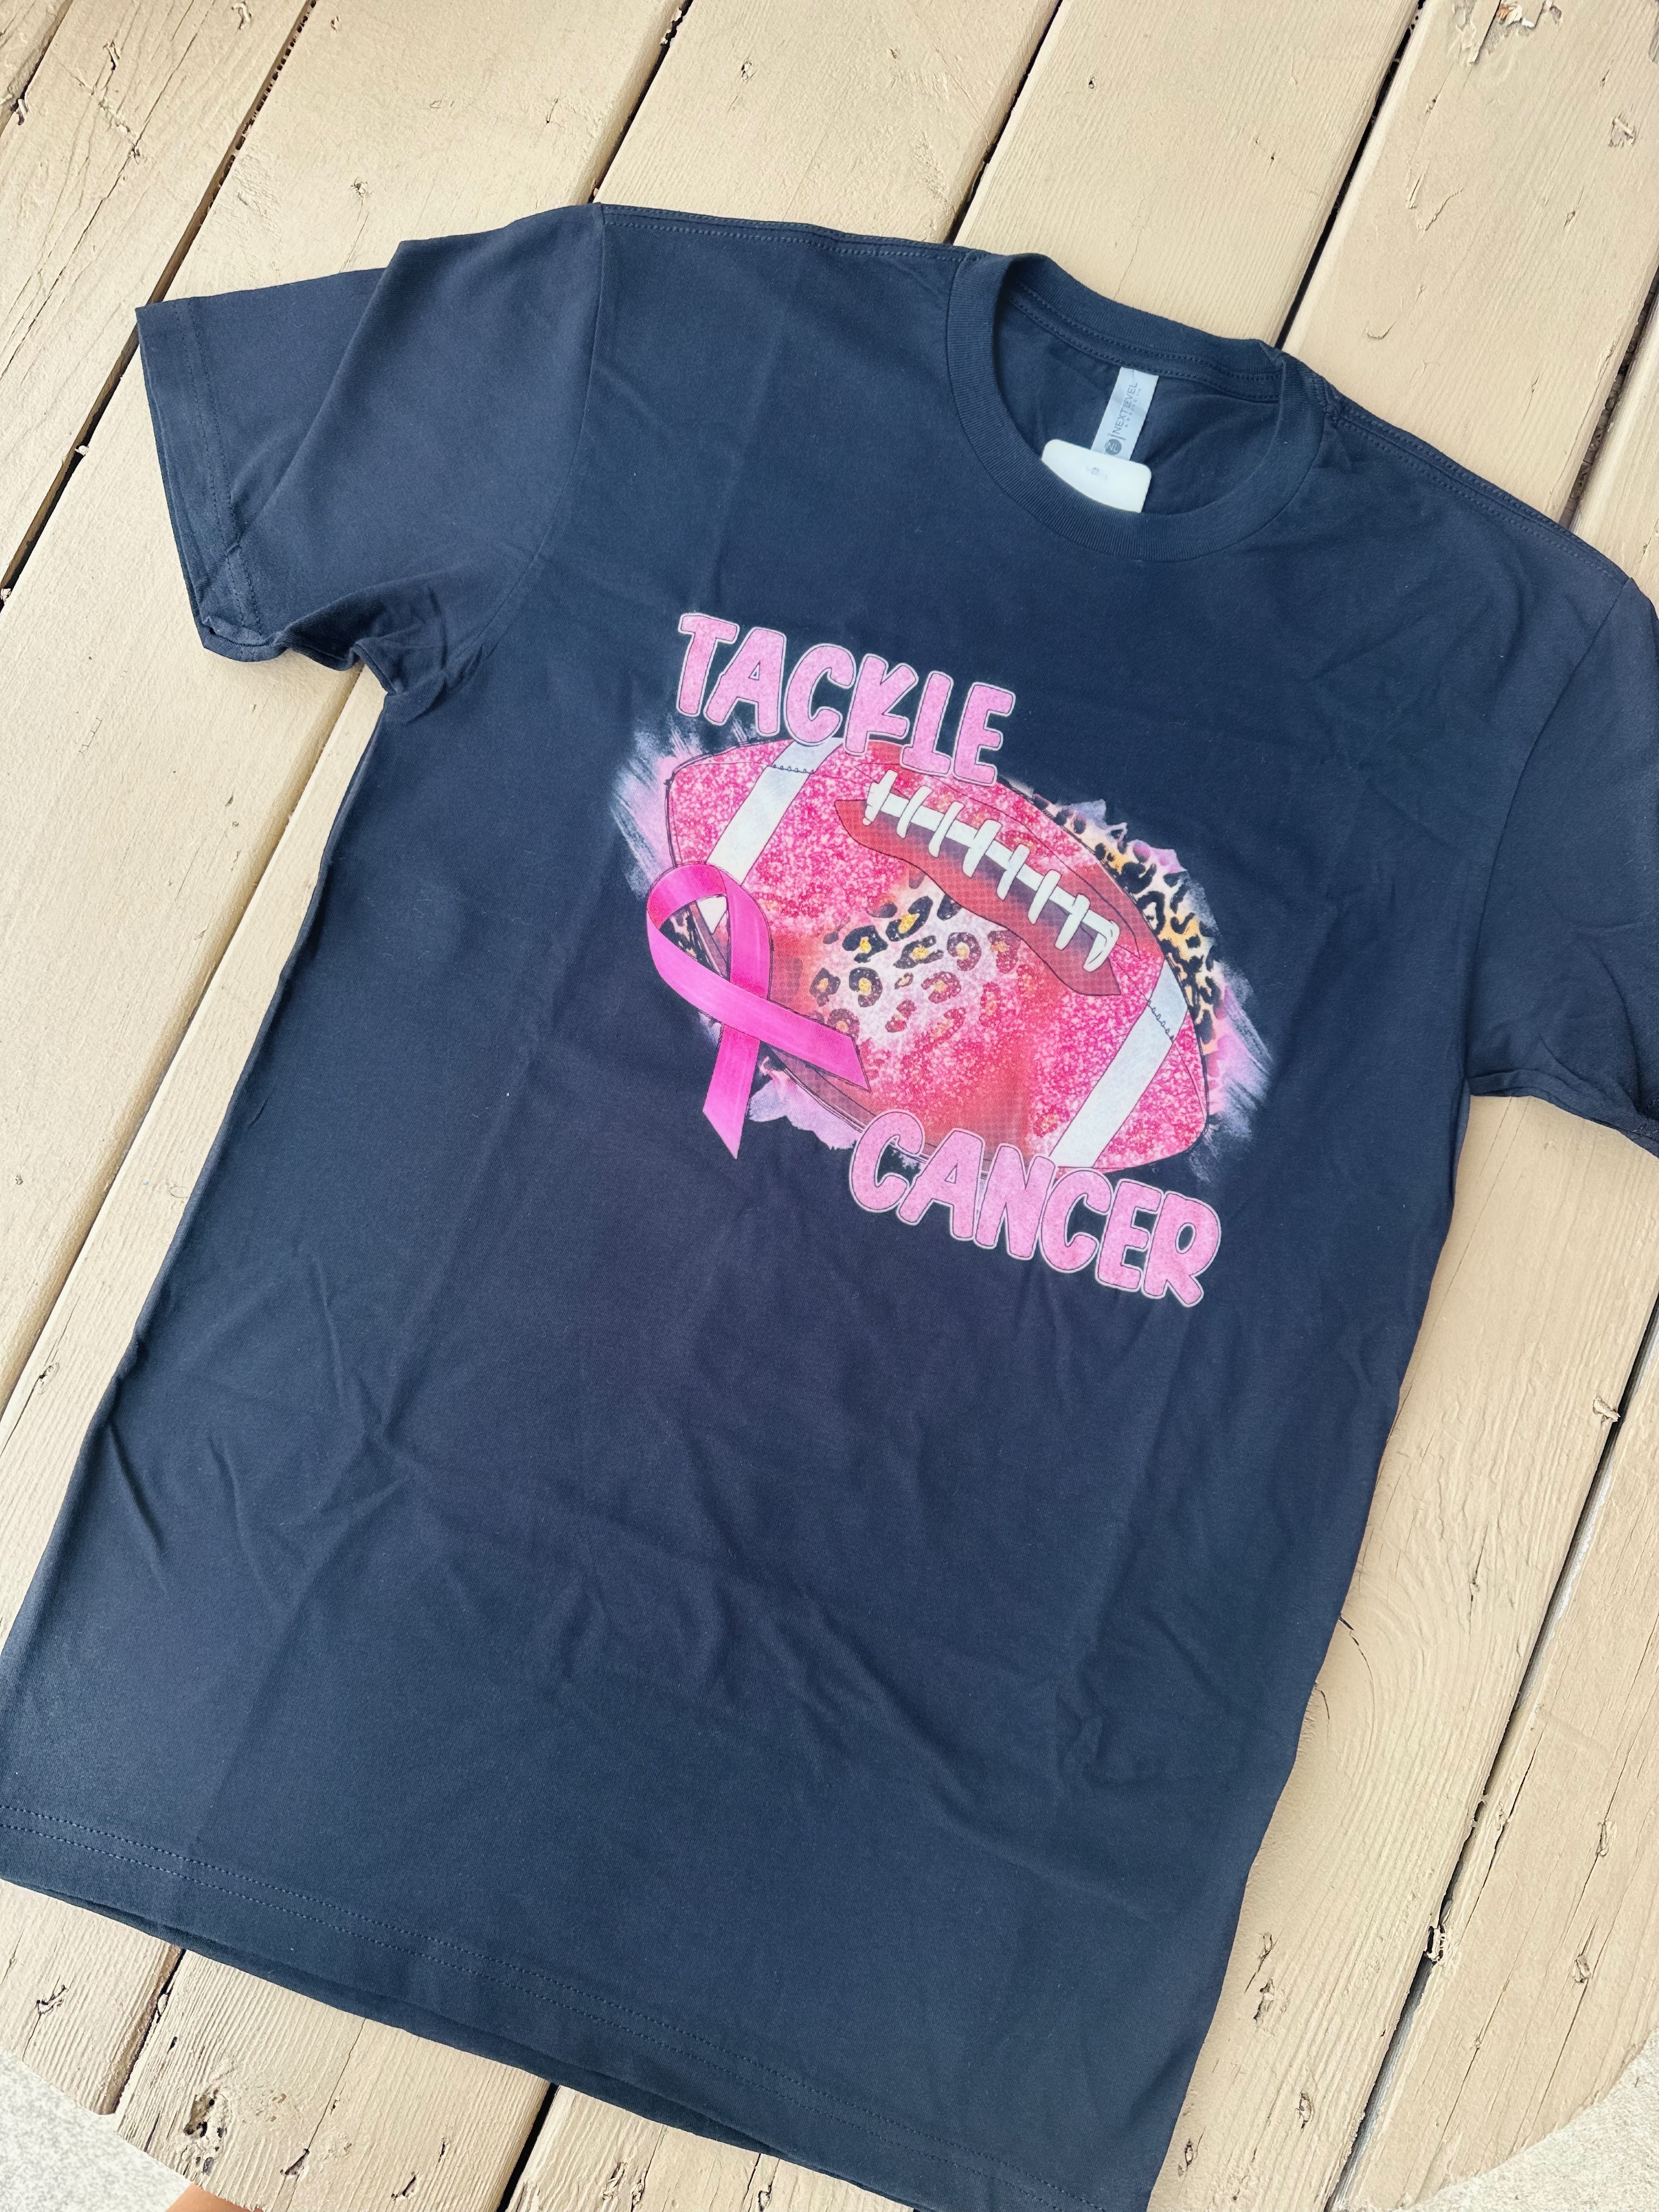 Tackle Cancer Football T-Shirt – Stubbs Dept. Store